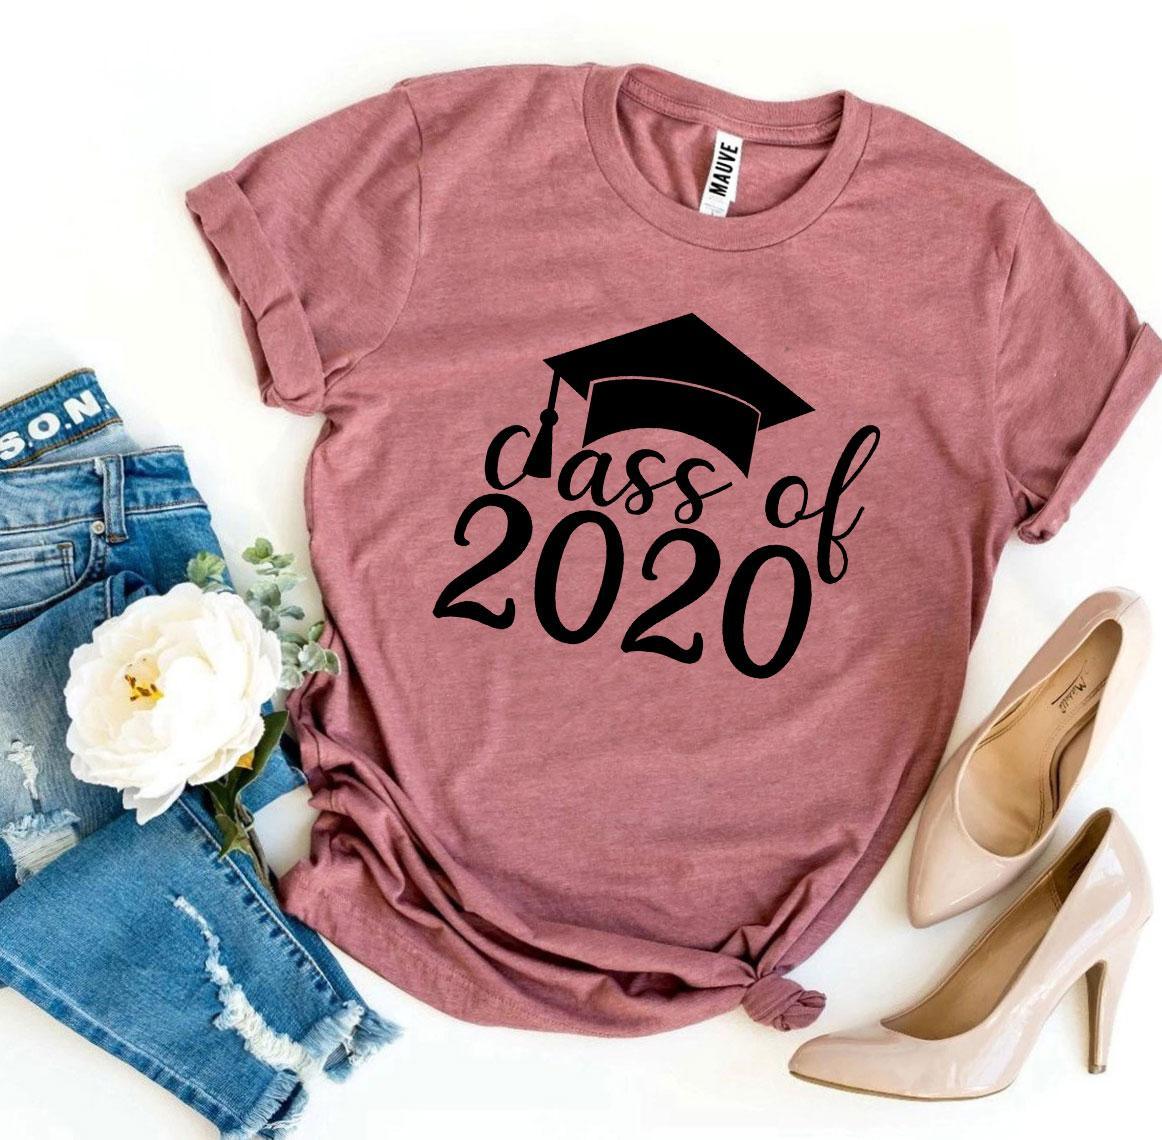 Class Of 2020 T-shirt - VirtuousWares:Global